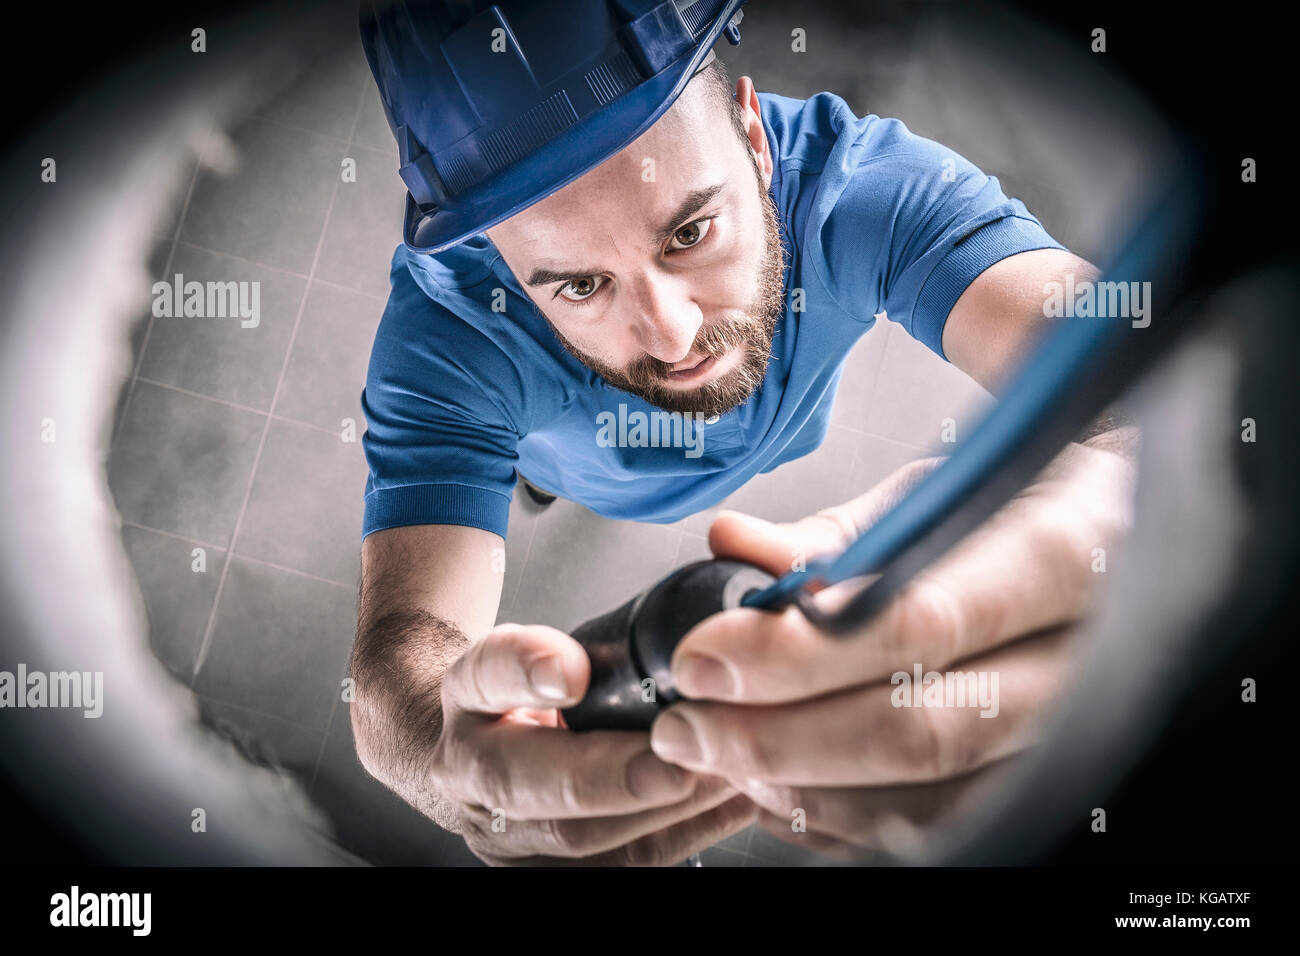 portrait of caucasian electrician at work Stock Photo